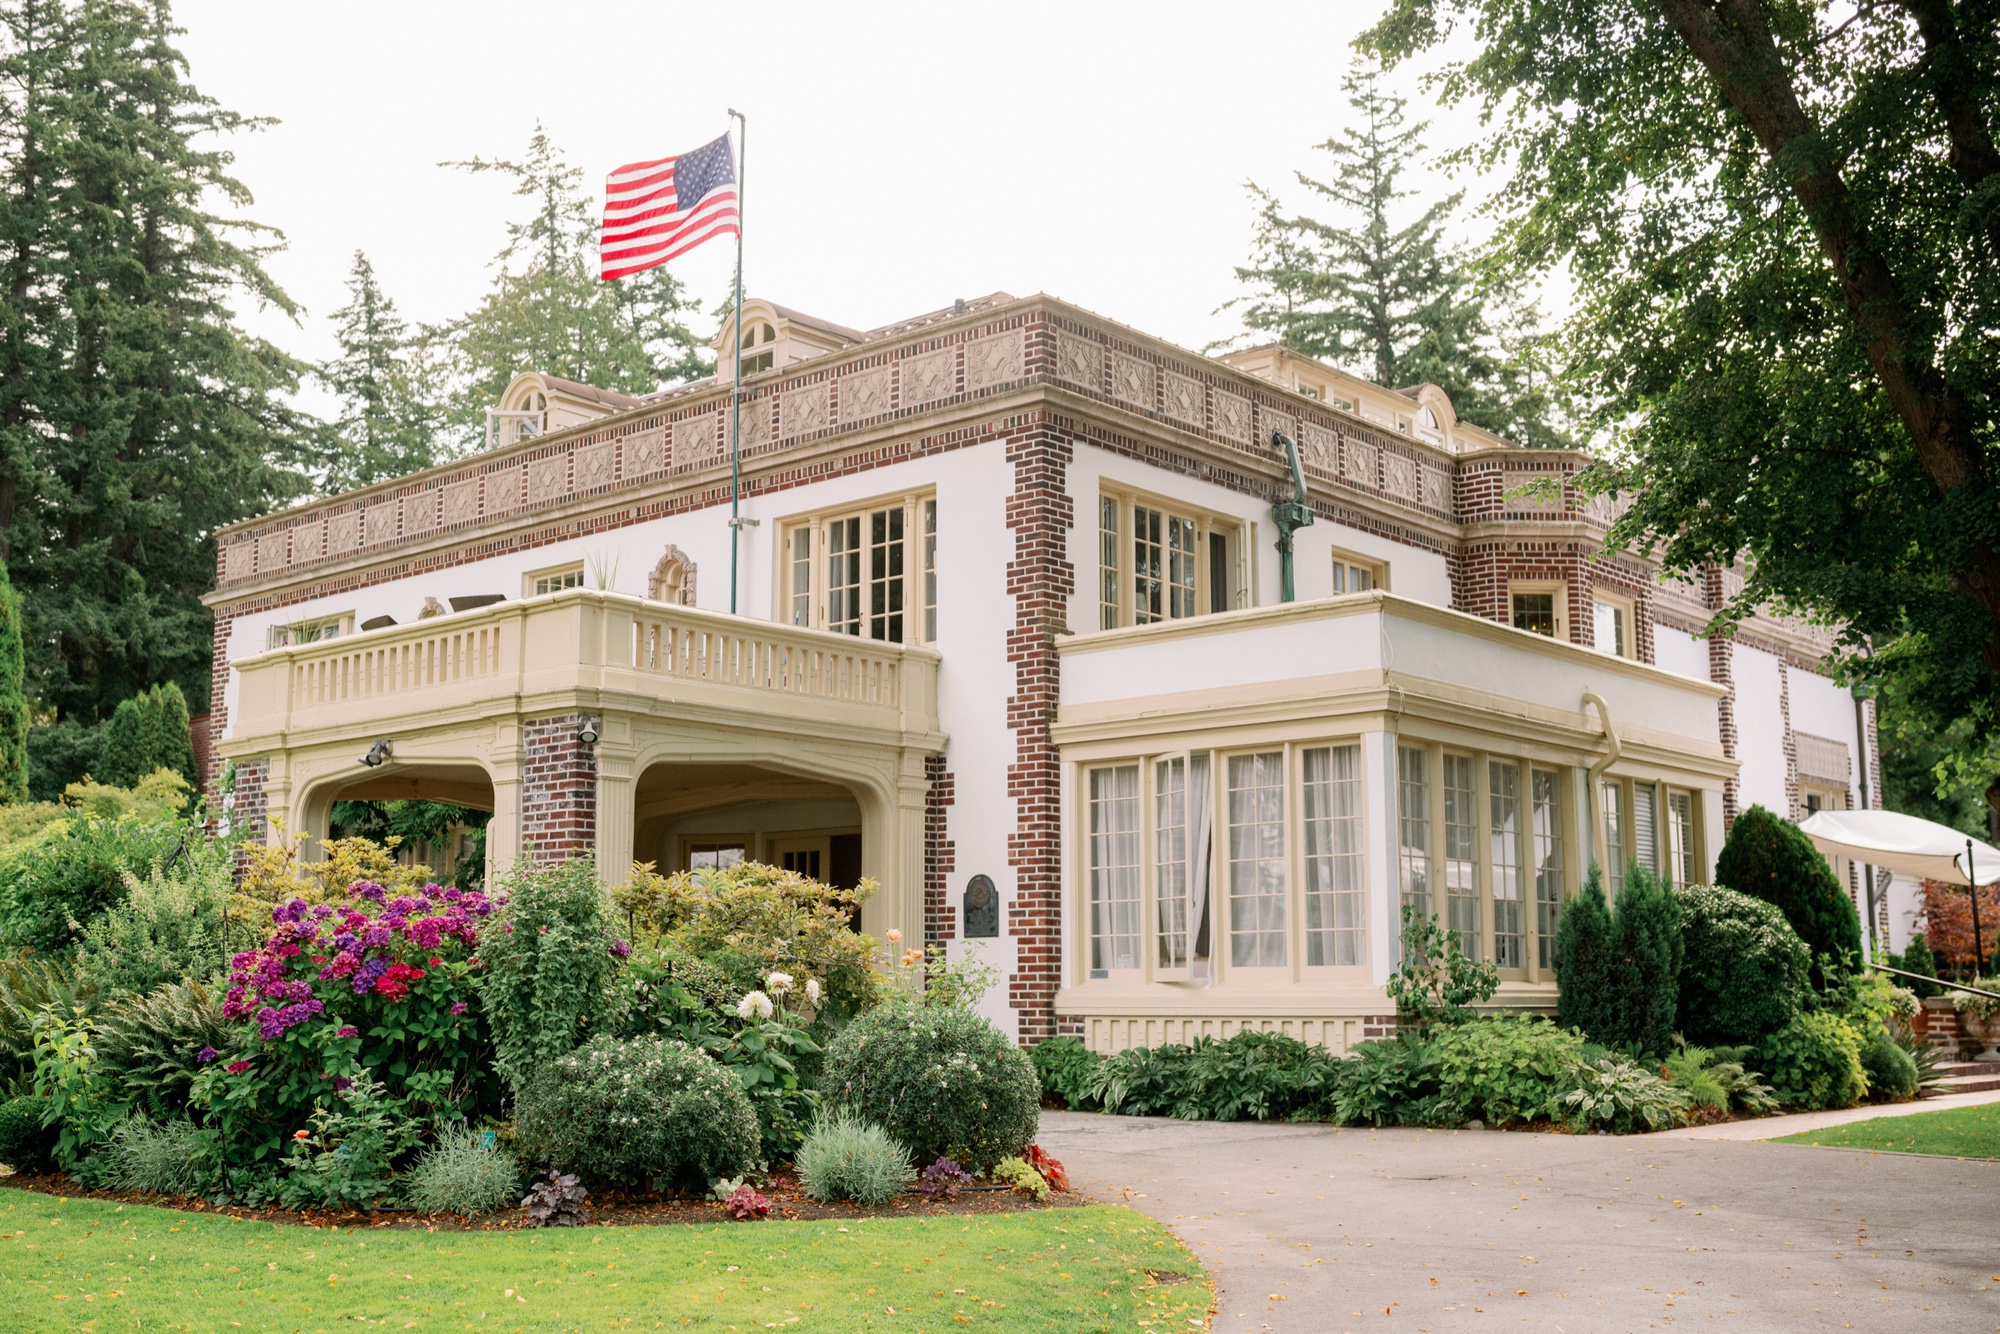 The historic Lairmont Manor in Bellingham.